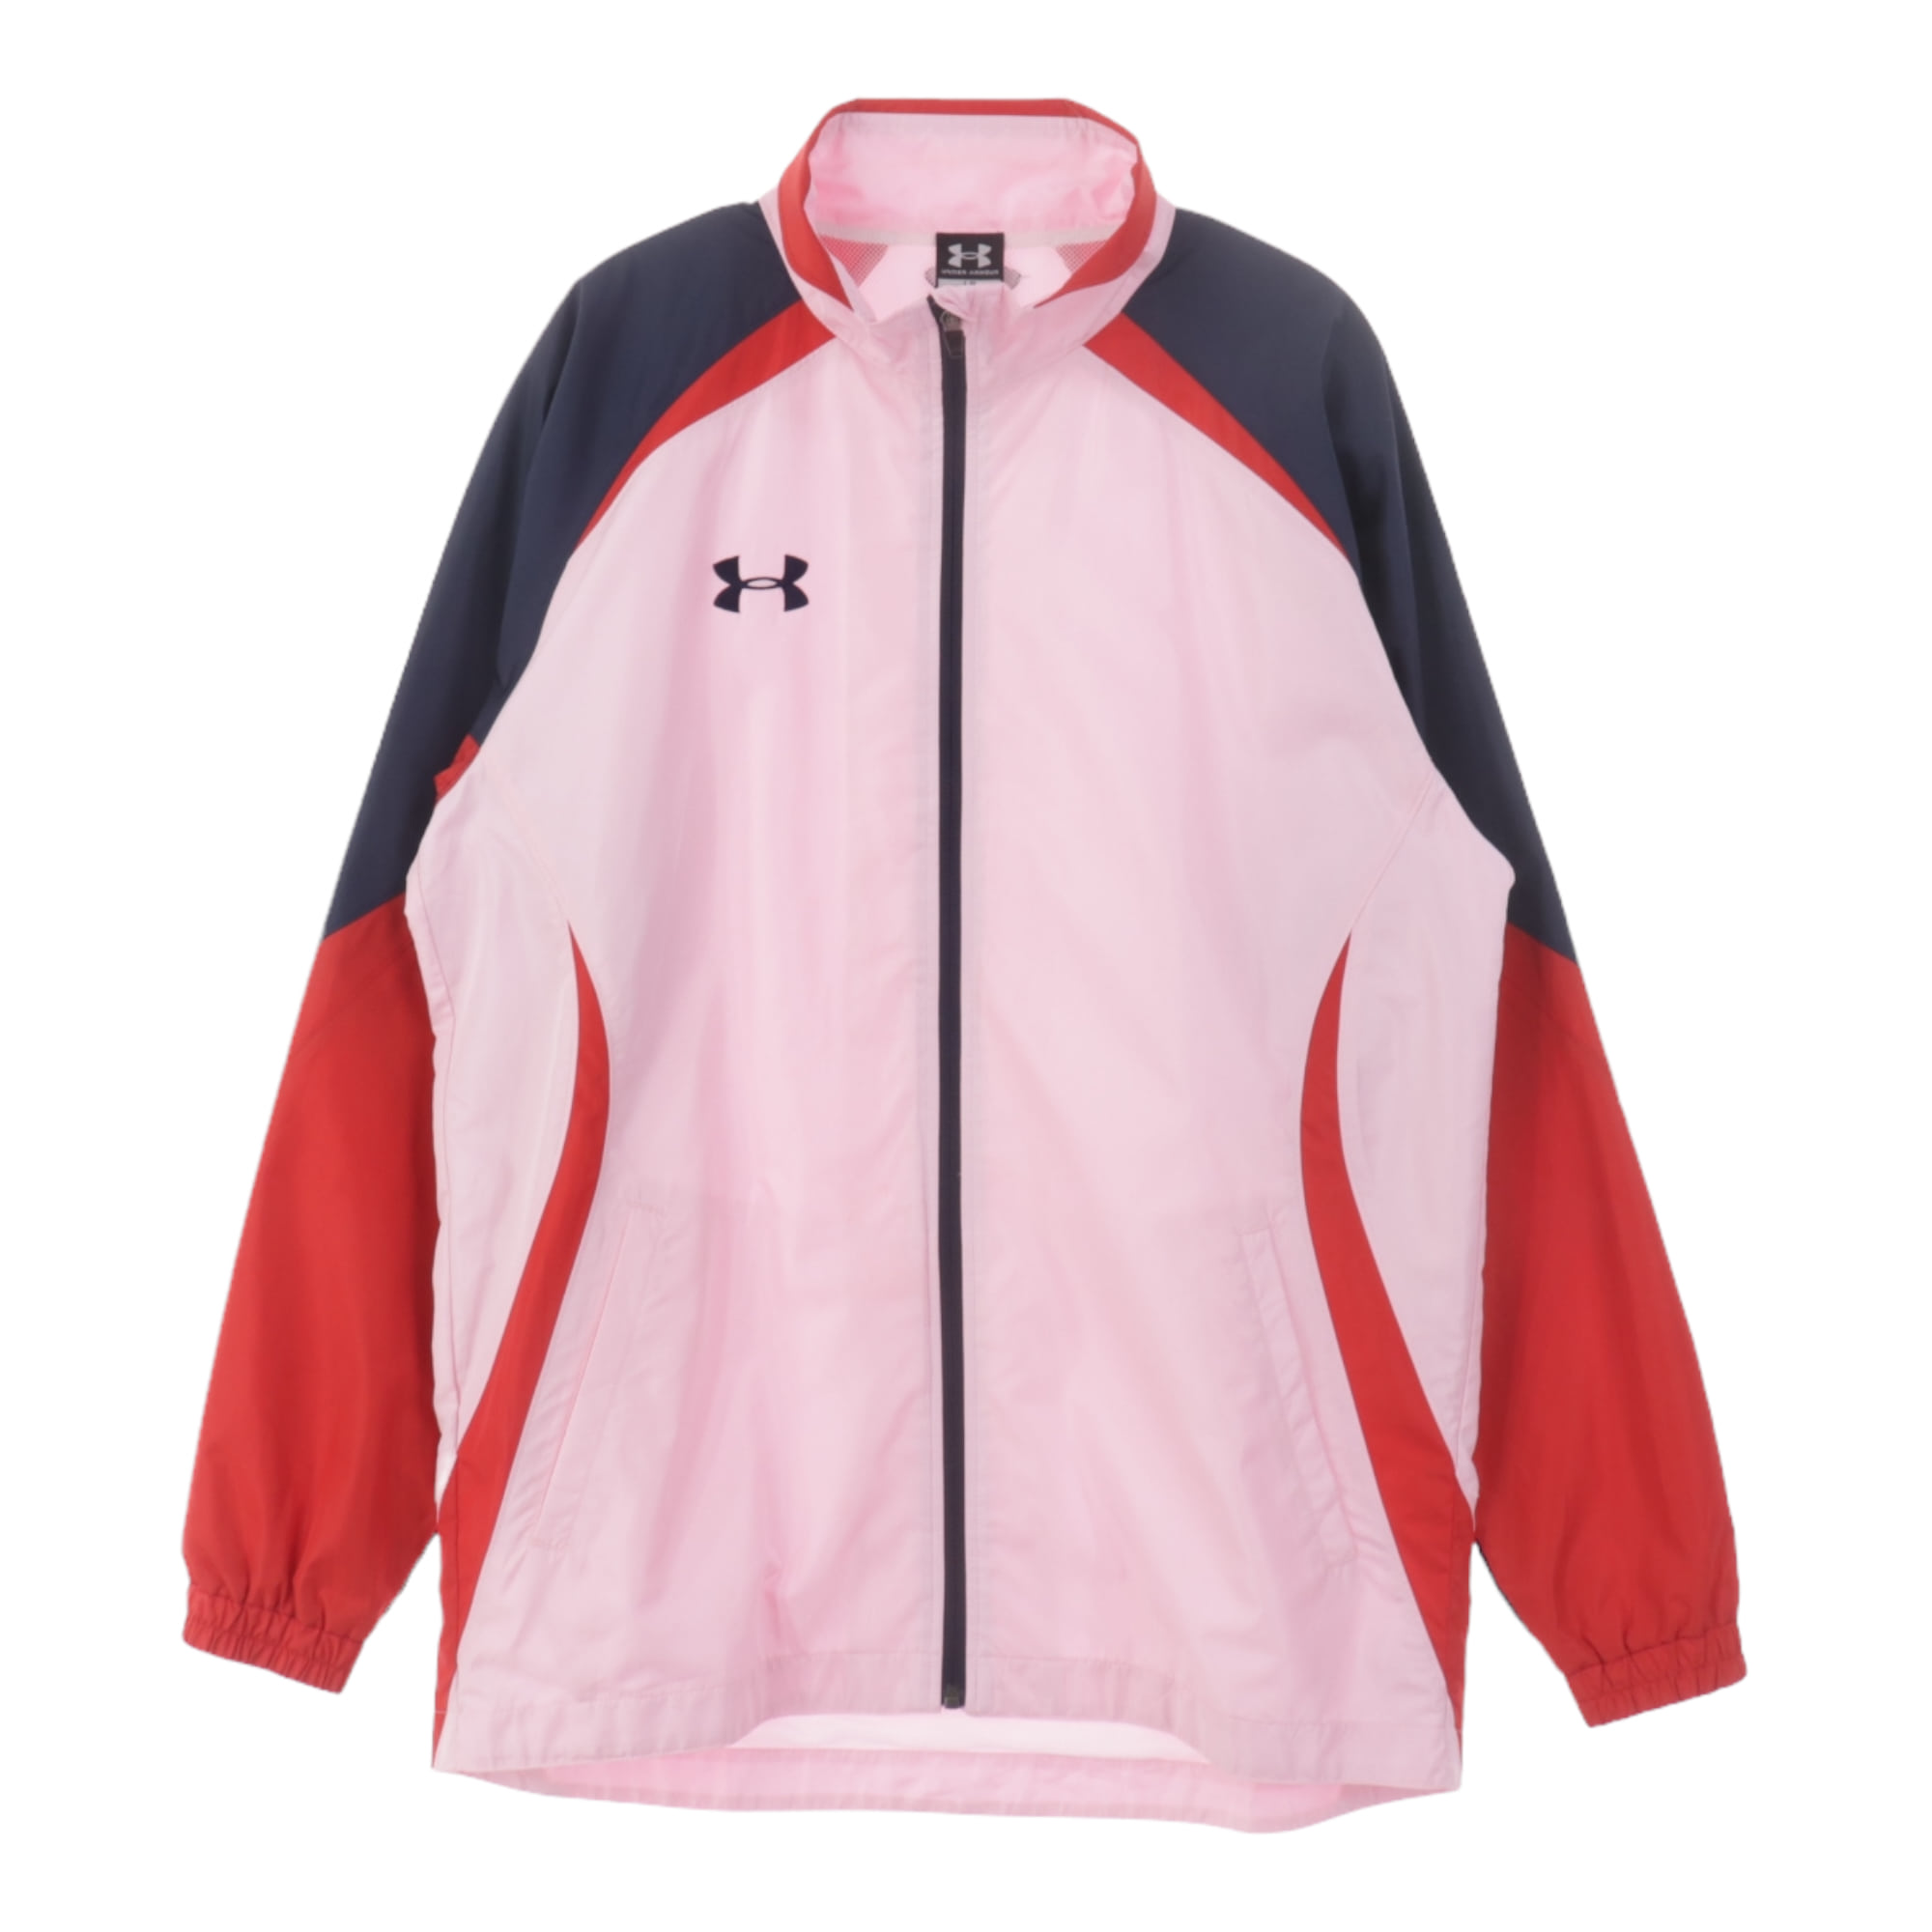 Under Armour,Sports